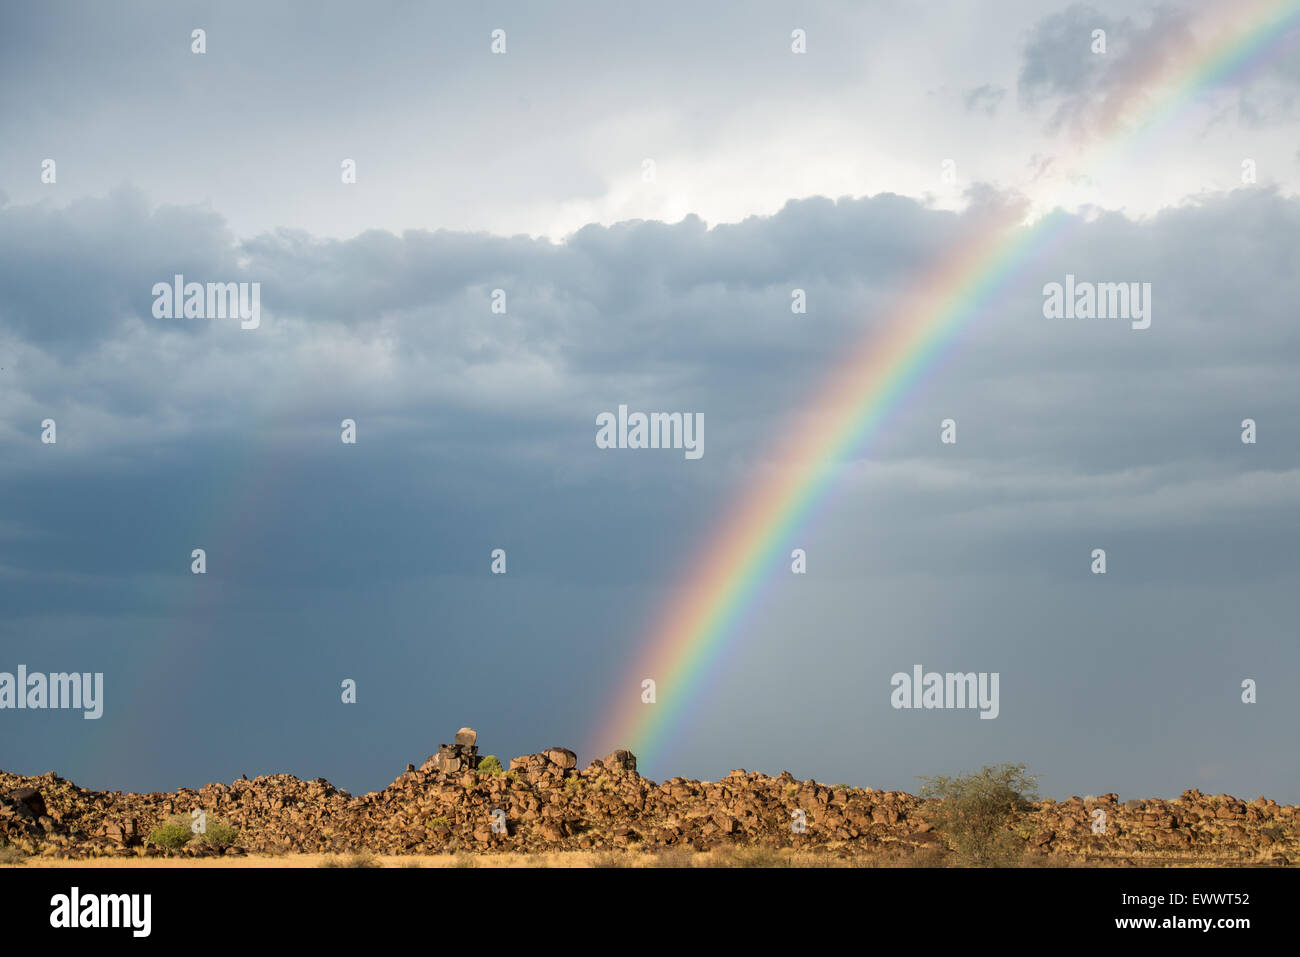 Keetmanshoop, Namibia, Africa - Rainbow in the sky over dry landscape Stock Photo